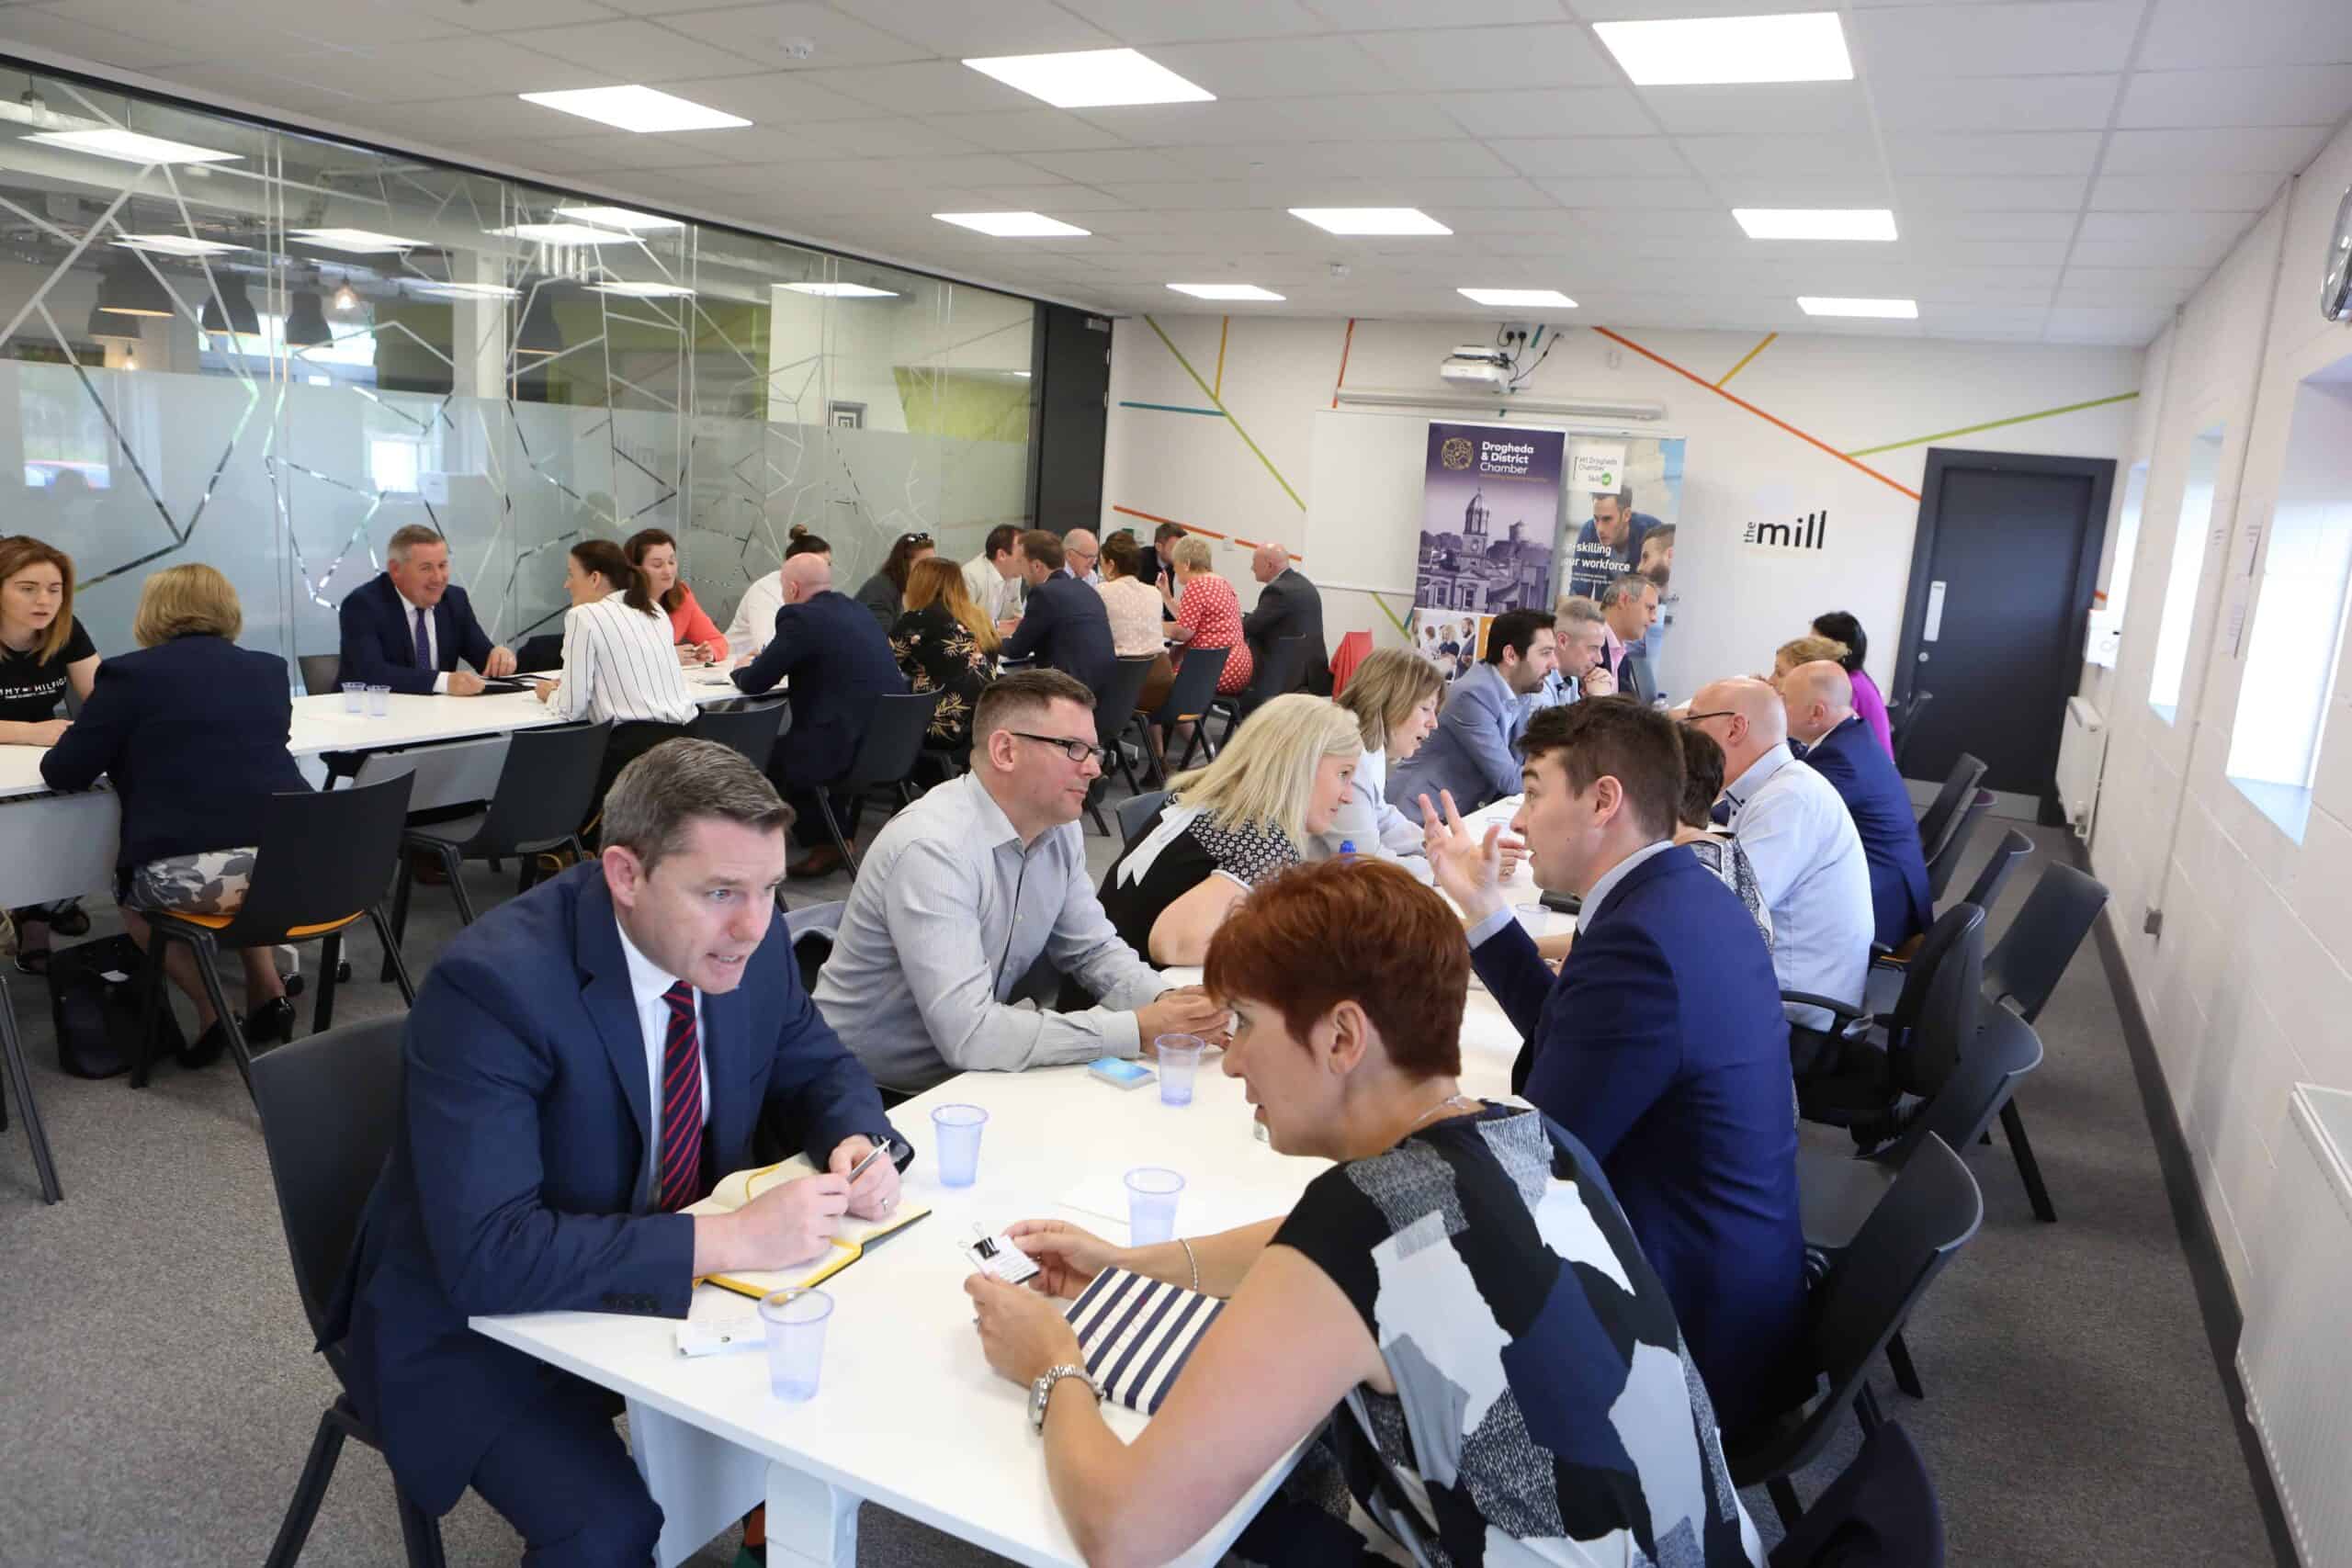 Great Success at our Speed Networking Event